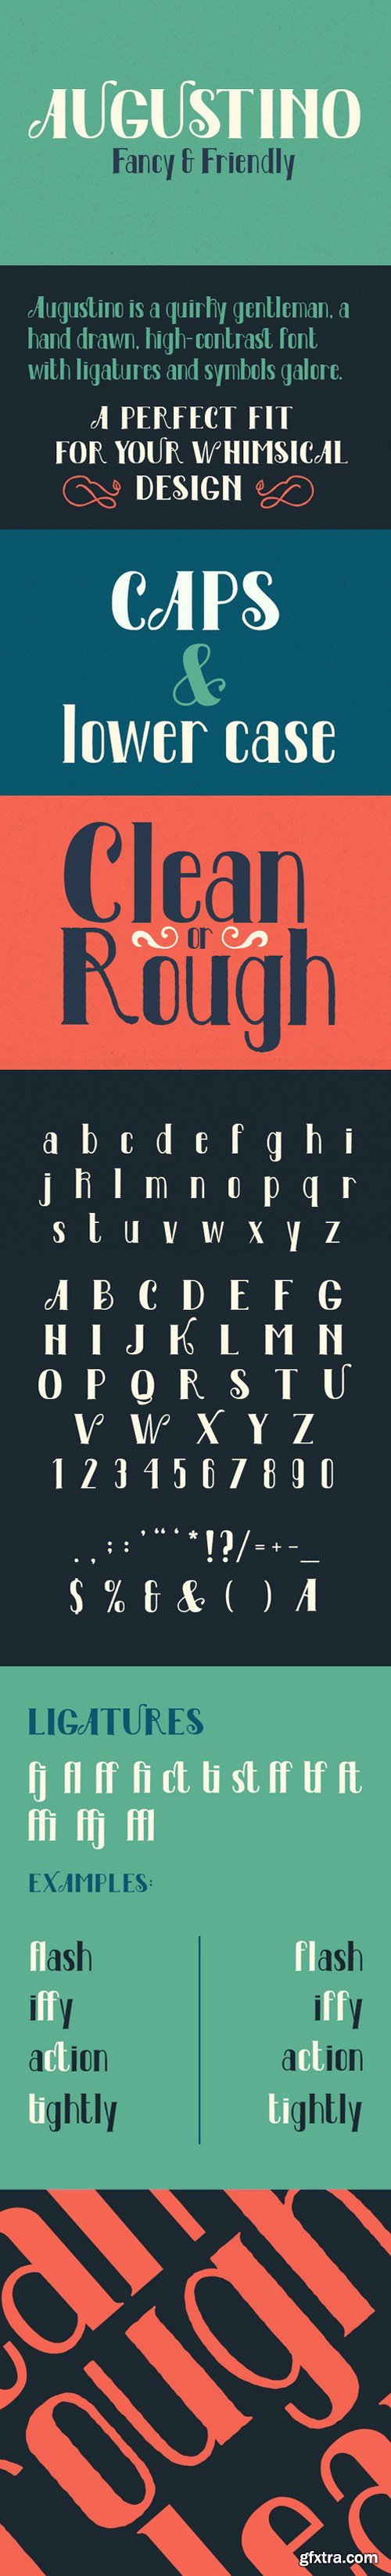 Augustino Font Family